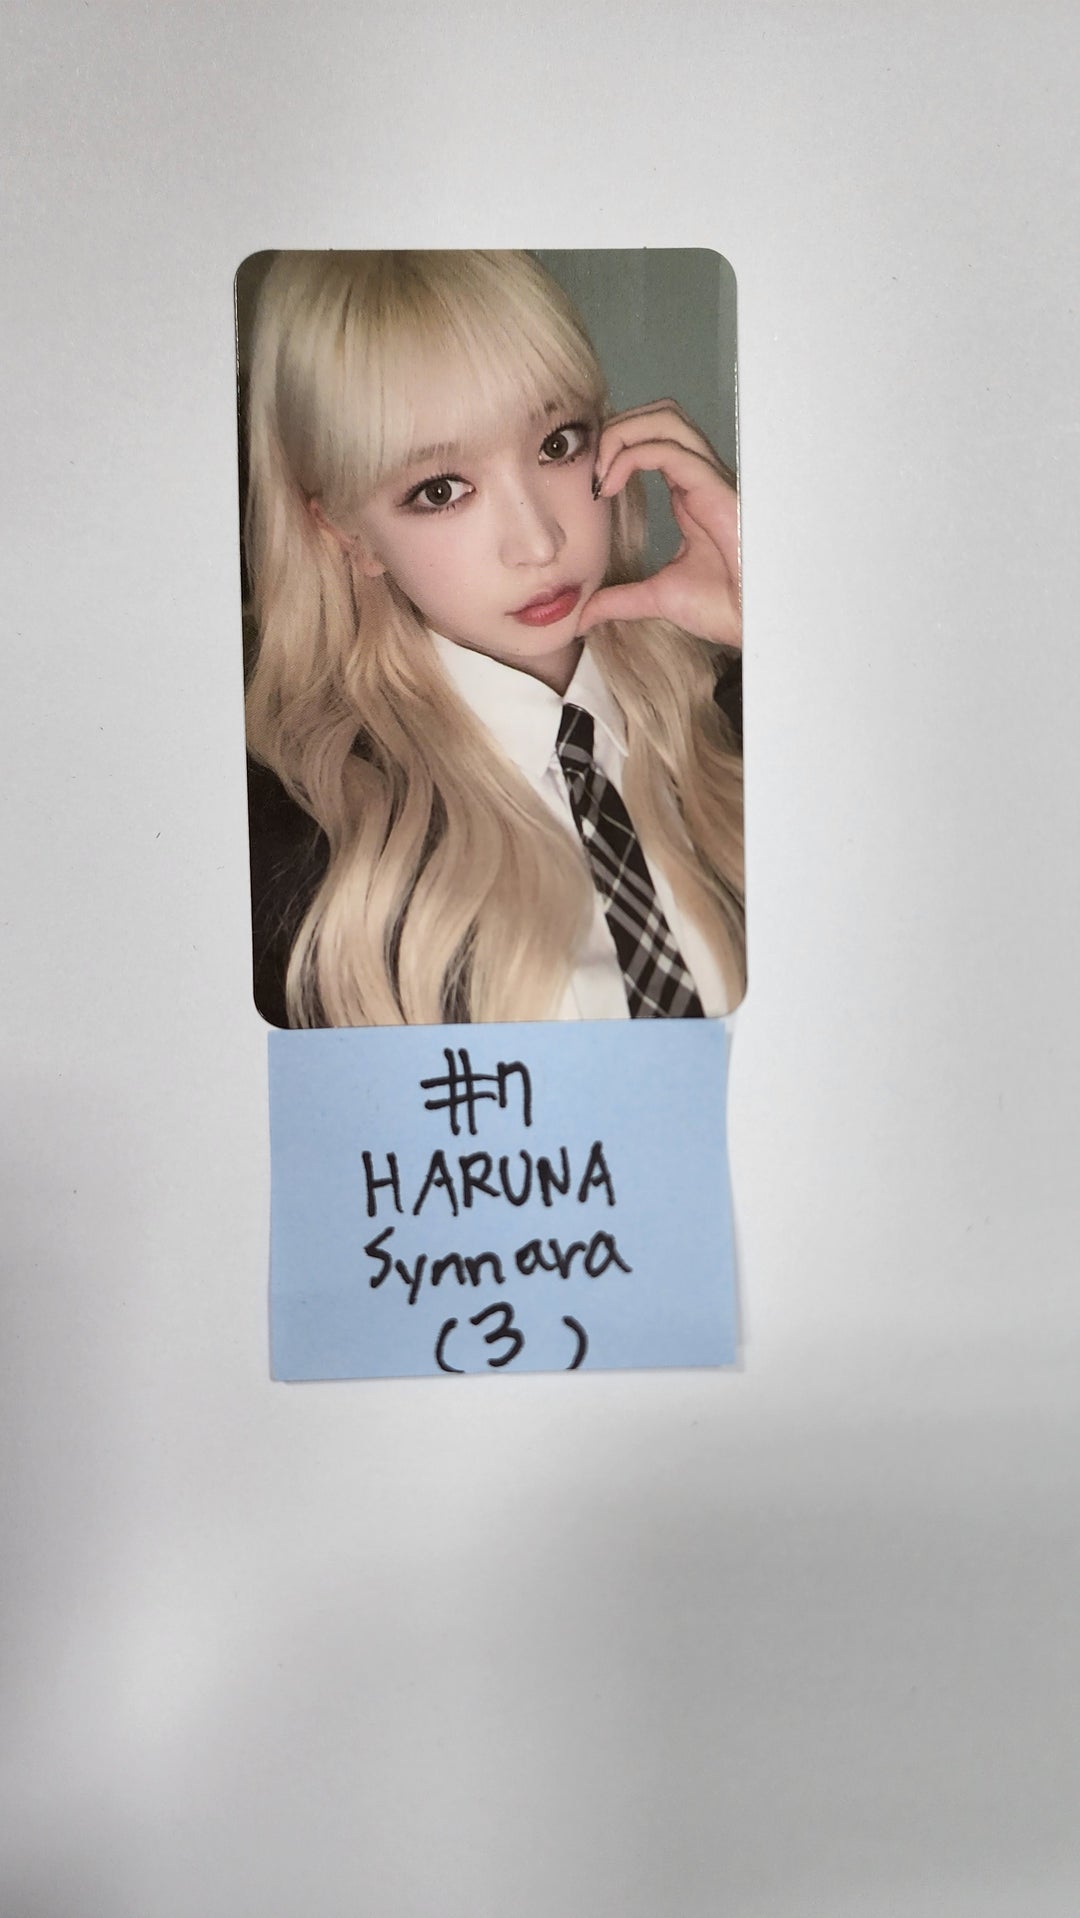 Billlie 'the Billage of perception : chapter two' - Synnara Showcase Pre-Order Benefit Photocard